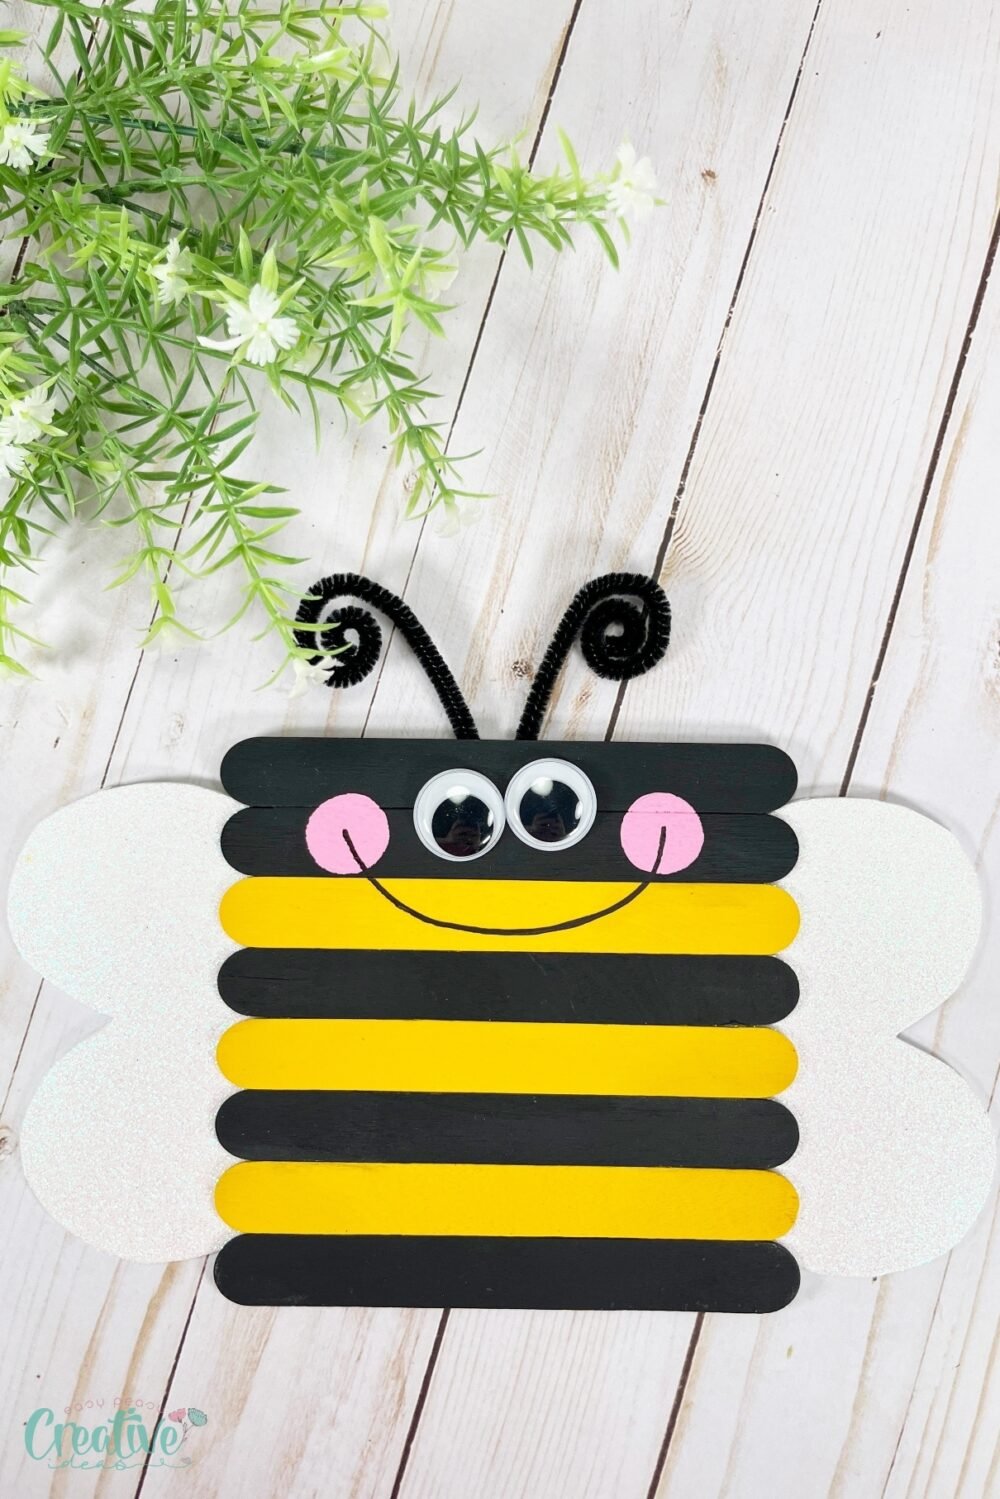 Dive into the world of crafting with this easy bee craft for kids. Follow the step-by-step tutorial to create adorable bee decorations using simple materials. Let your imagination take flight and enjoy the buzzing fun!